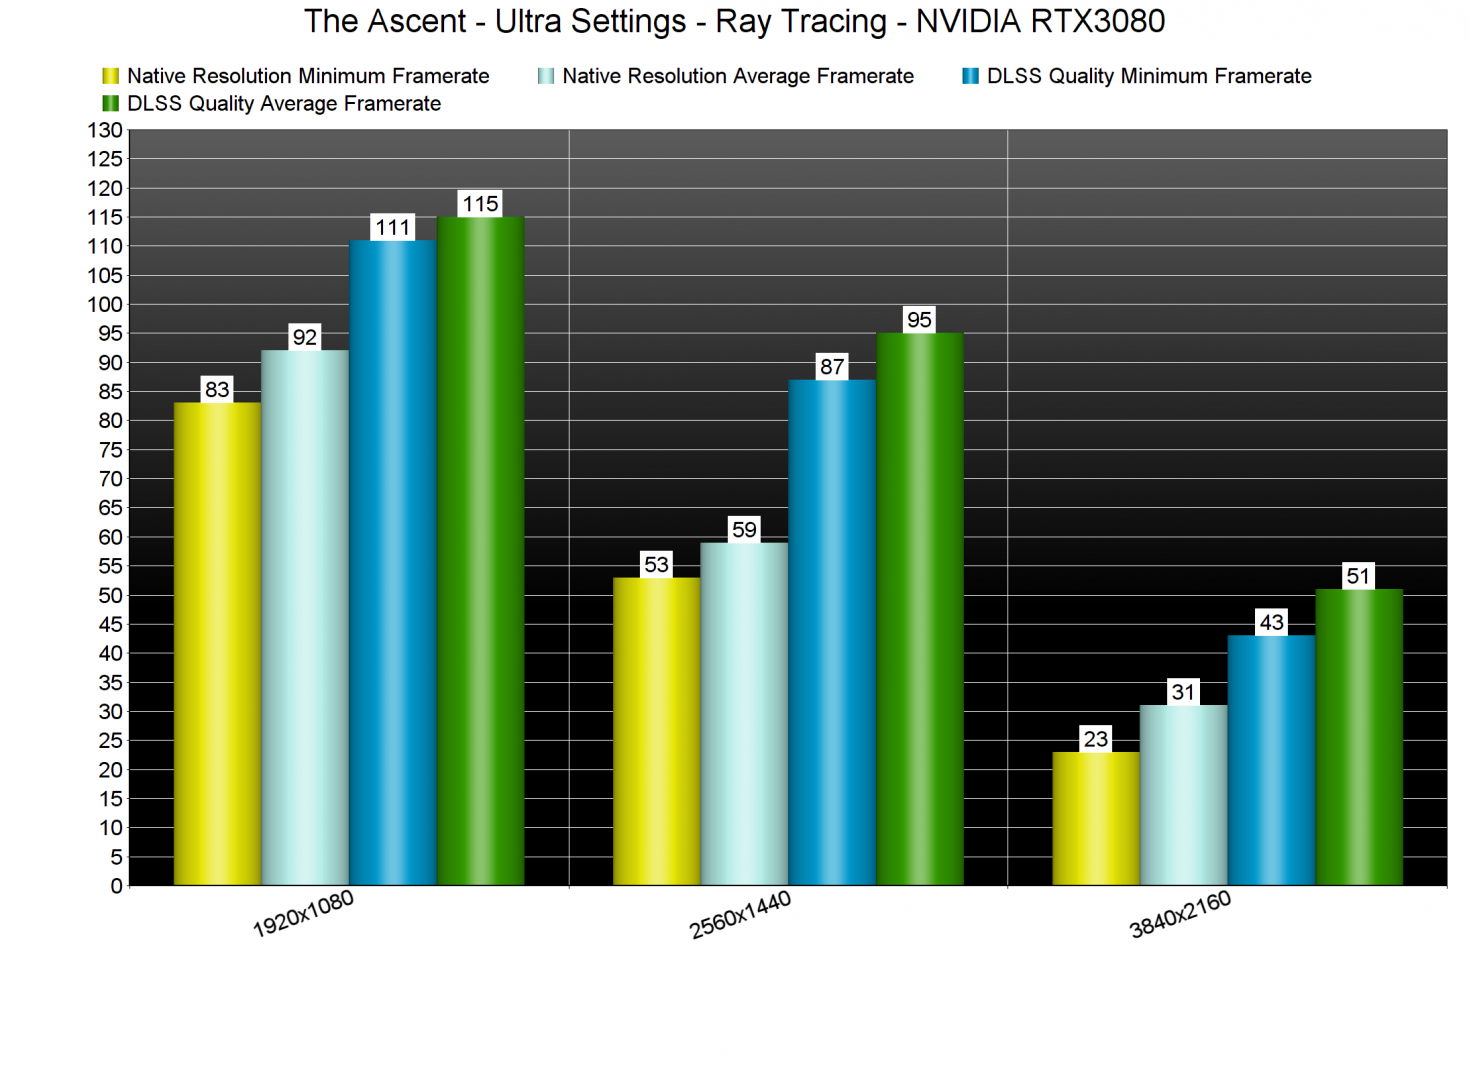 The Ascent Ray Tracing benchmarks